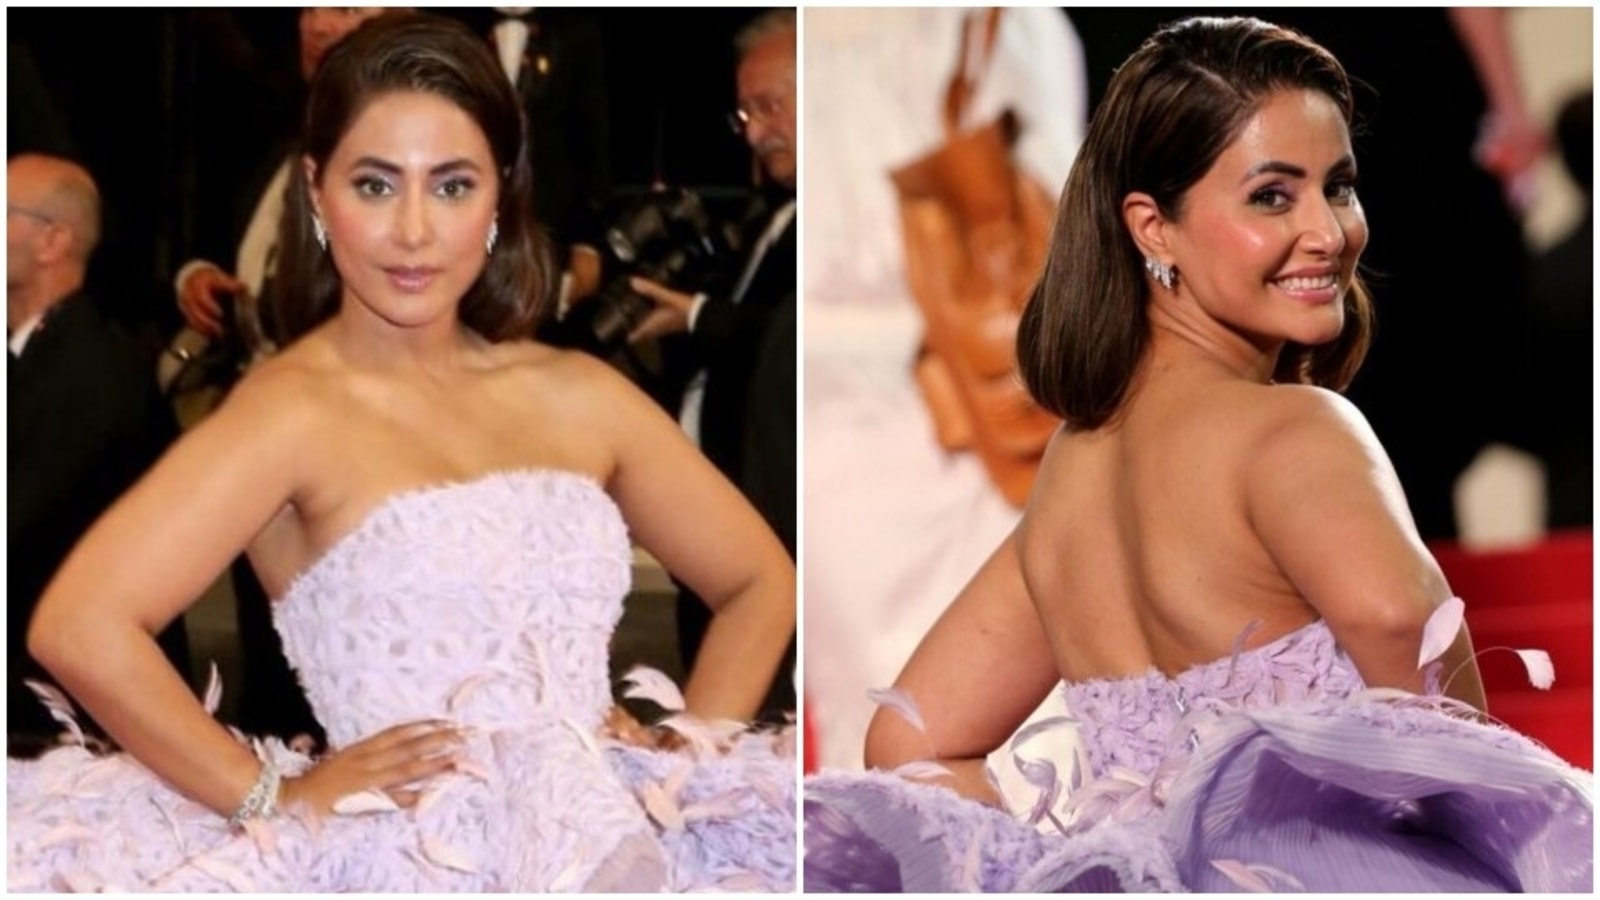 Hina Khan in a dreamy lavender gown shows how it is done at the Cannes Film Festival 2022 red carpet: All pics inside